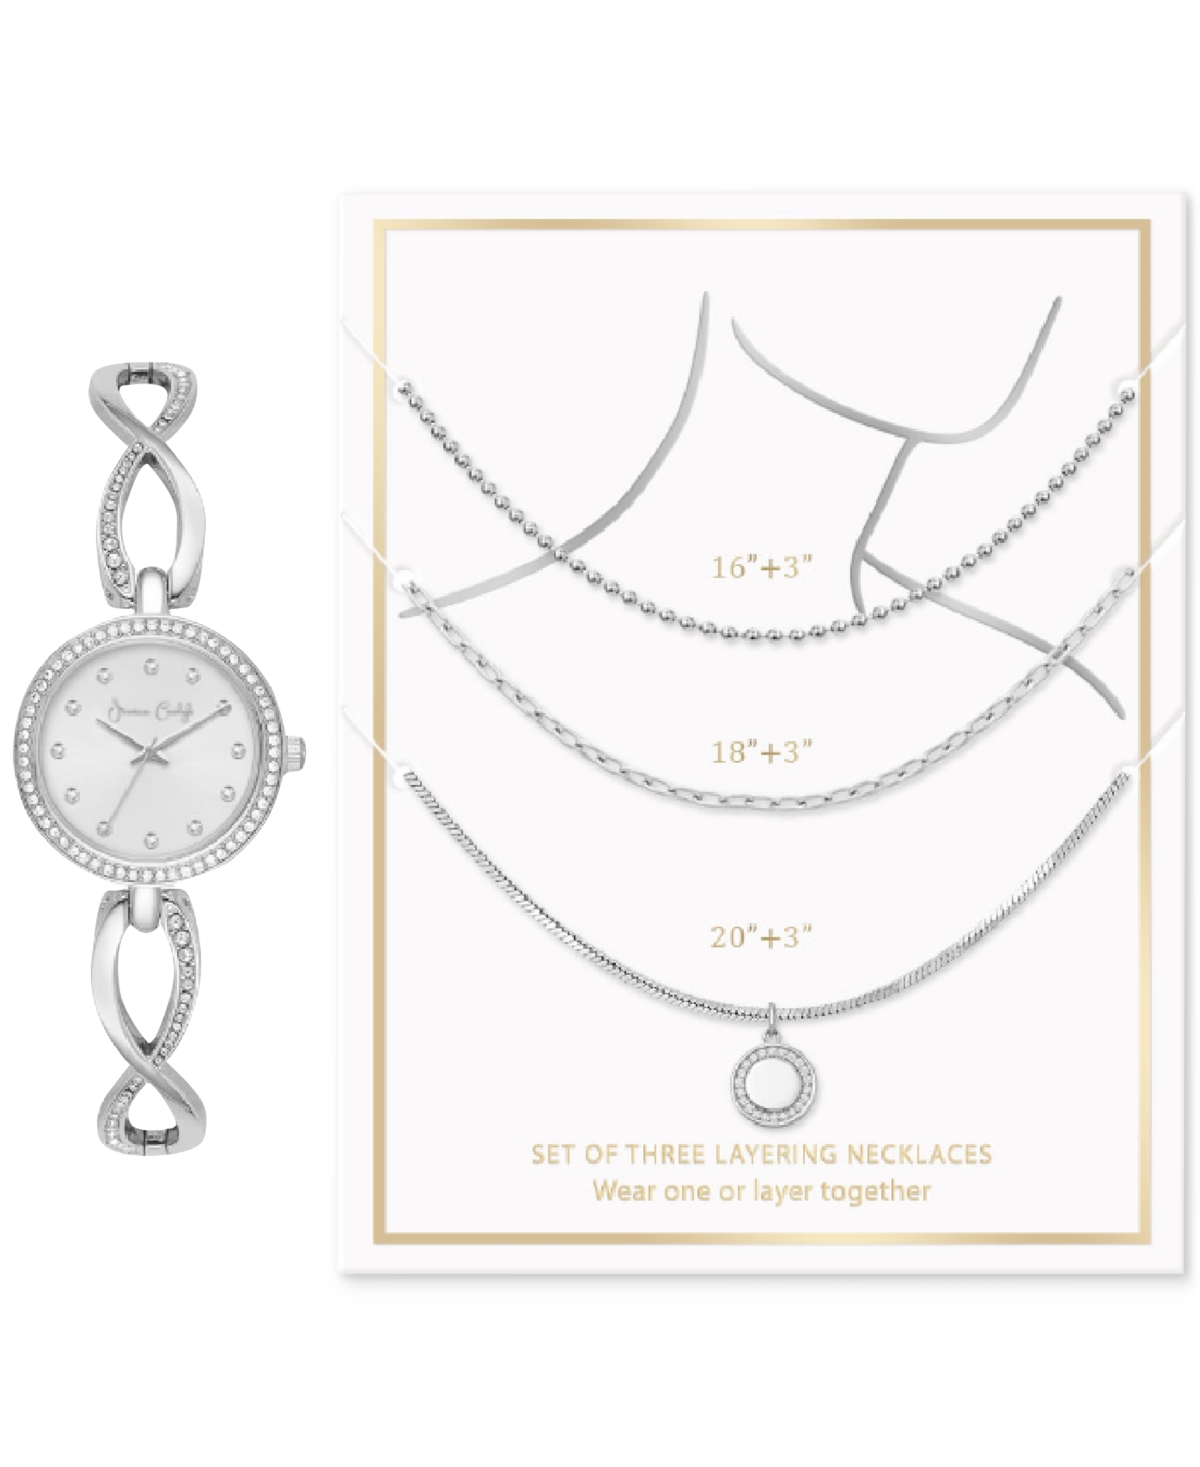 Jessica Carlyle Women's Crystal Bracelet Watch 30mm & 3-pc. Necklace Gift Set In Shiny Silver,light Silver Sunray